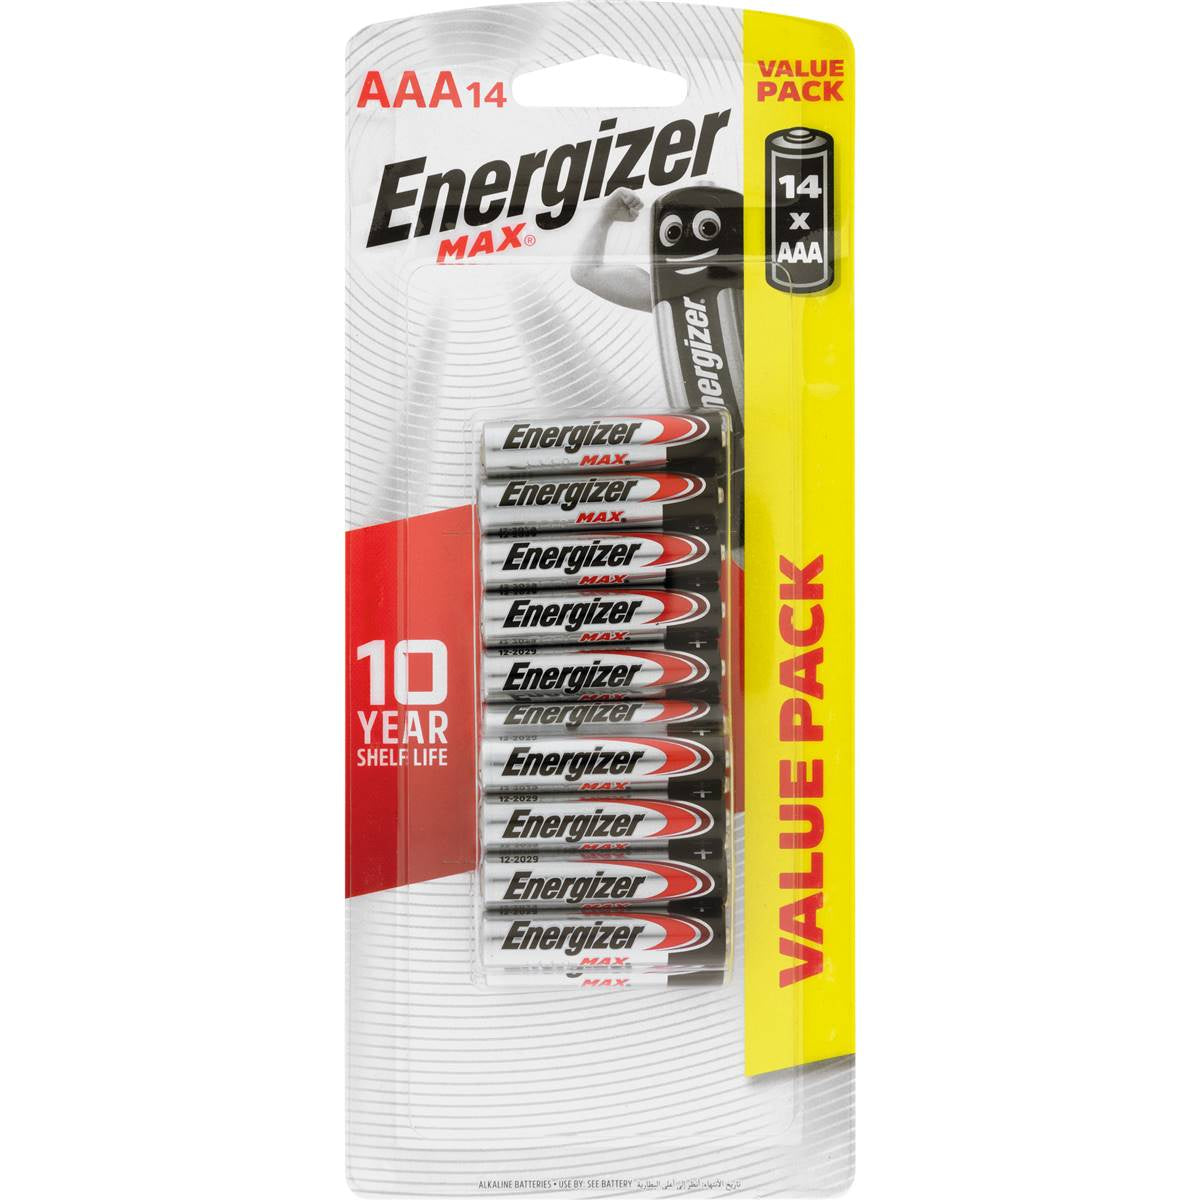 Energizer Max Battery AAA 14 Pack